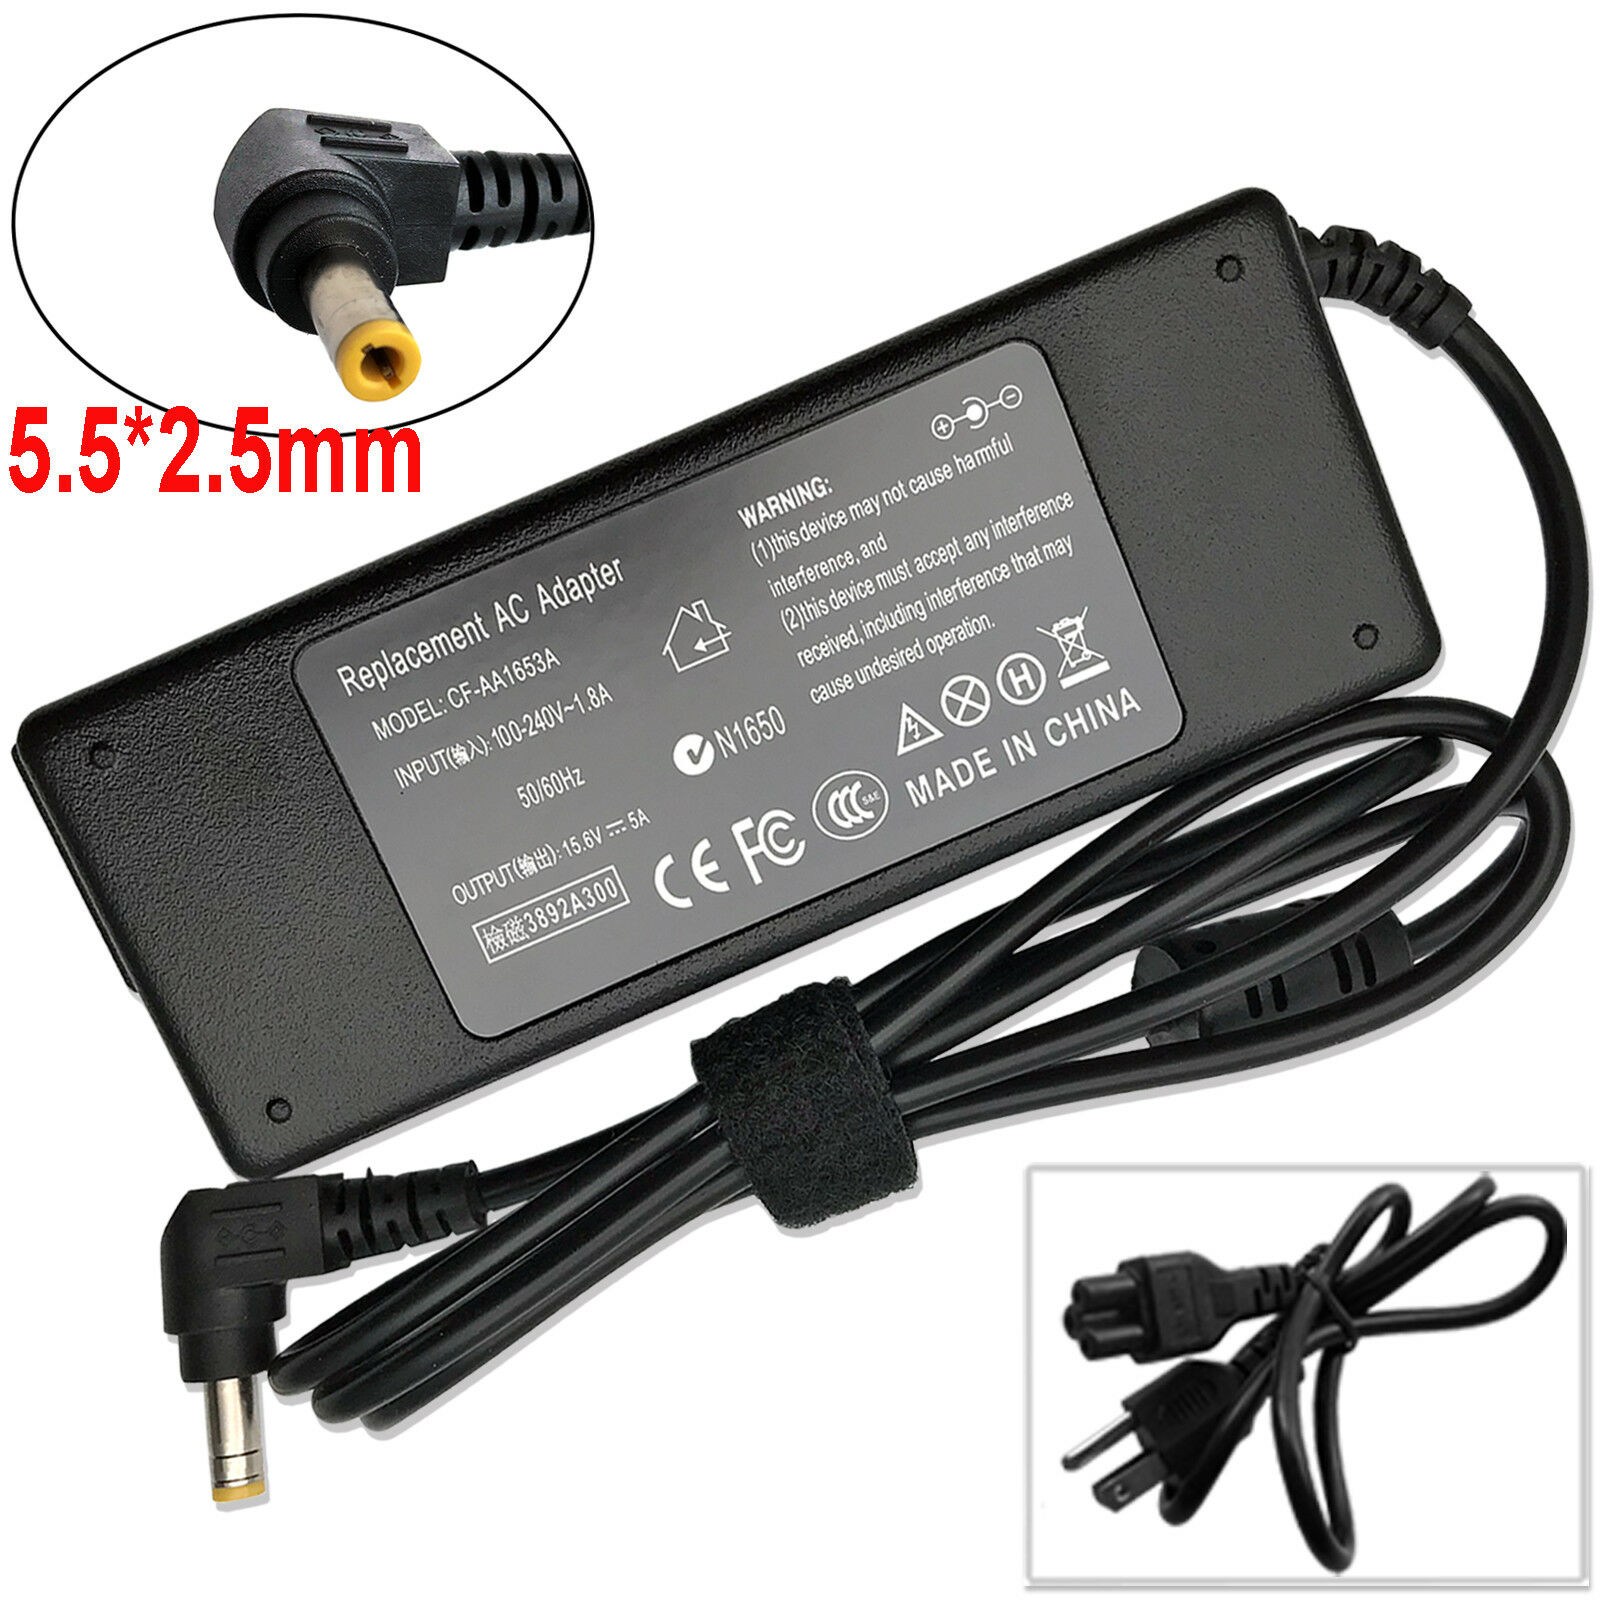 AC Adapter Charger for Panasonic ToughBook CF-18 CF-29 CF-30 CF-34 CF-50 CF-73 Brand: Unbranded/Generic Output Volta